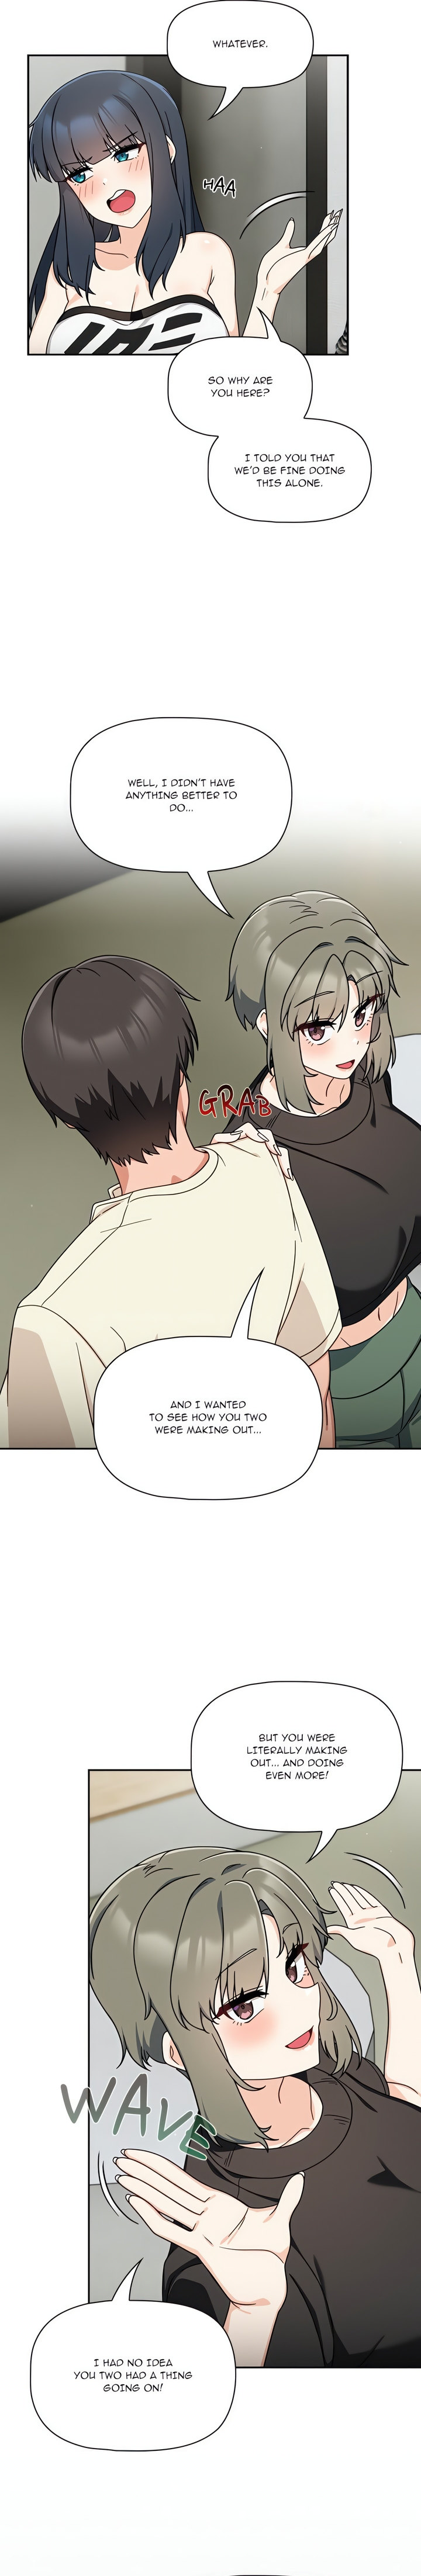 #Follow Me - Chapter 32 Page 5